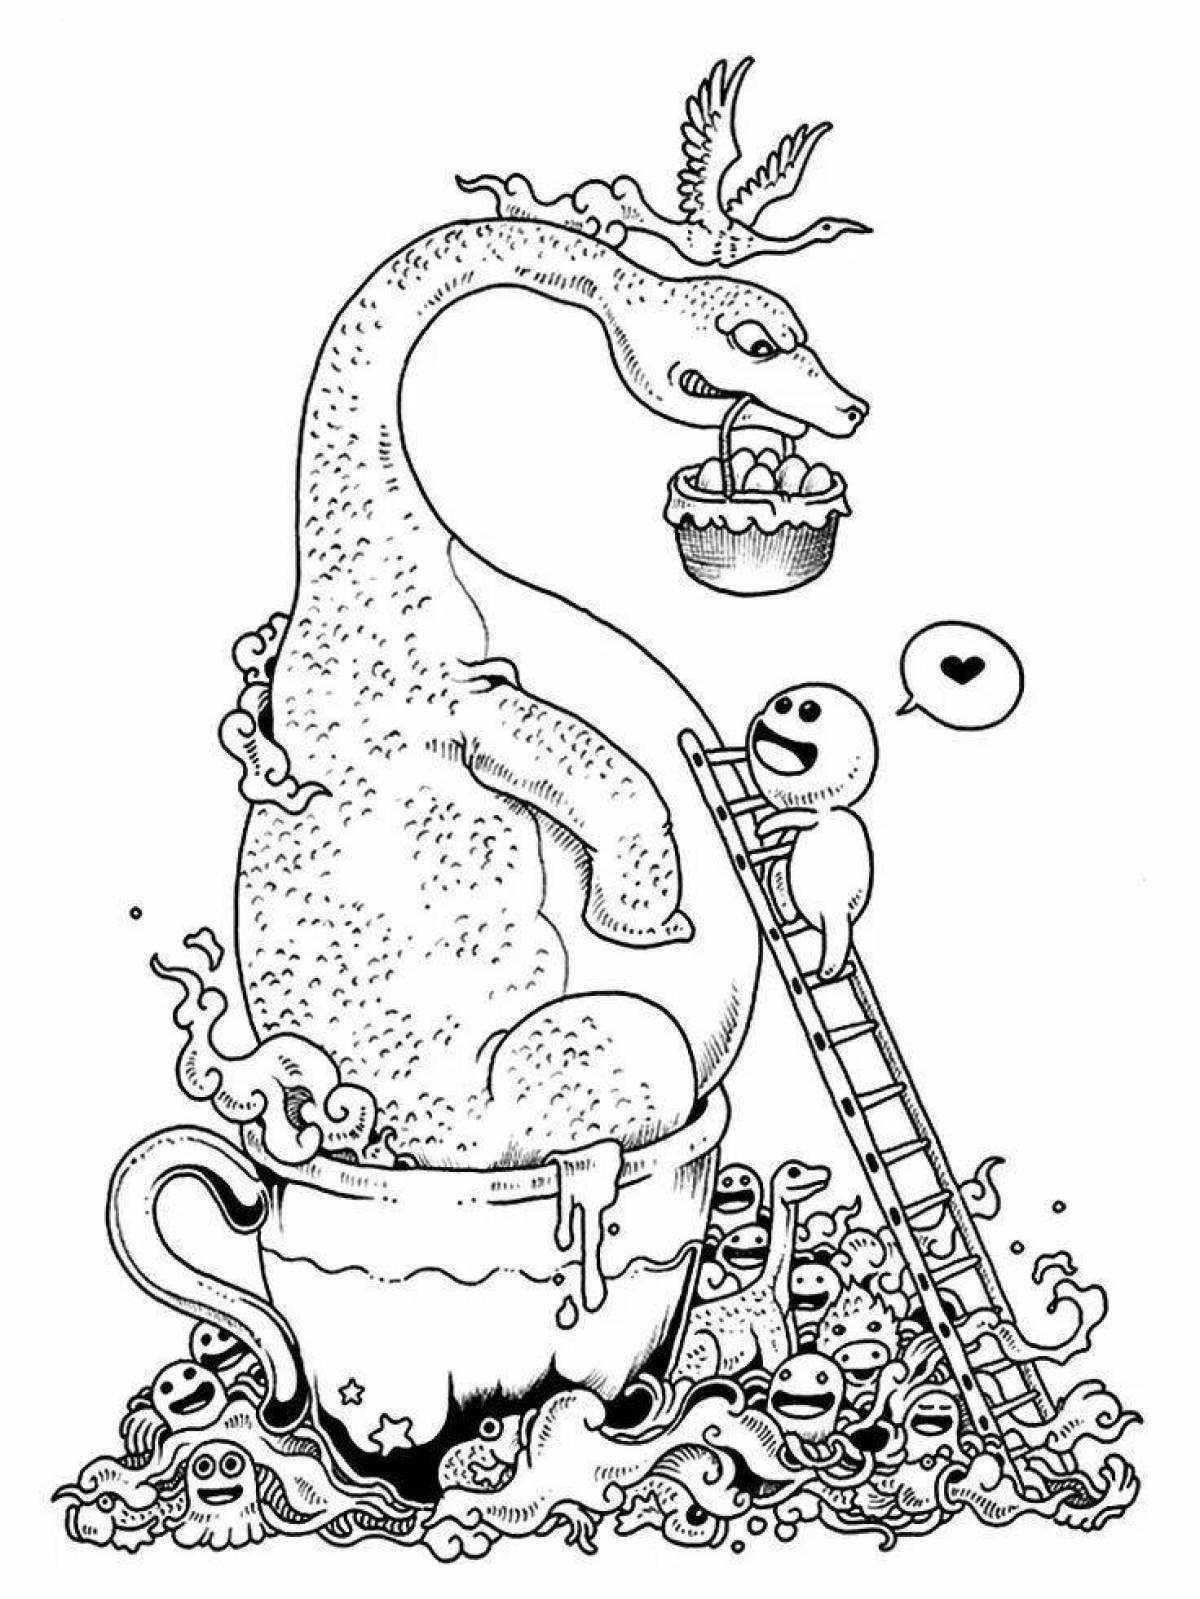 Doodle invasion coloring page